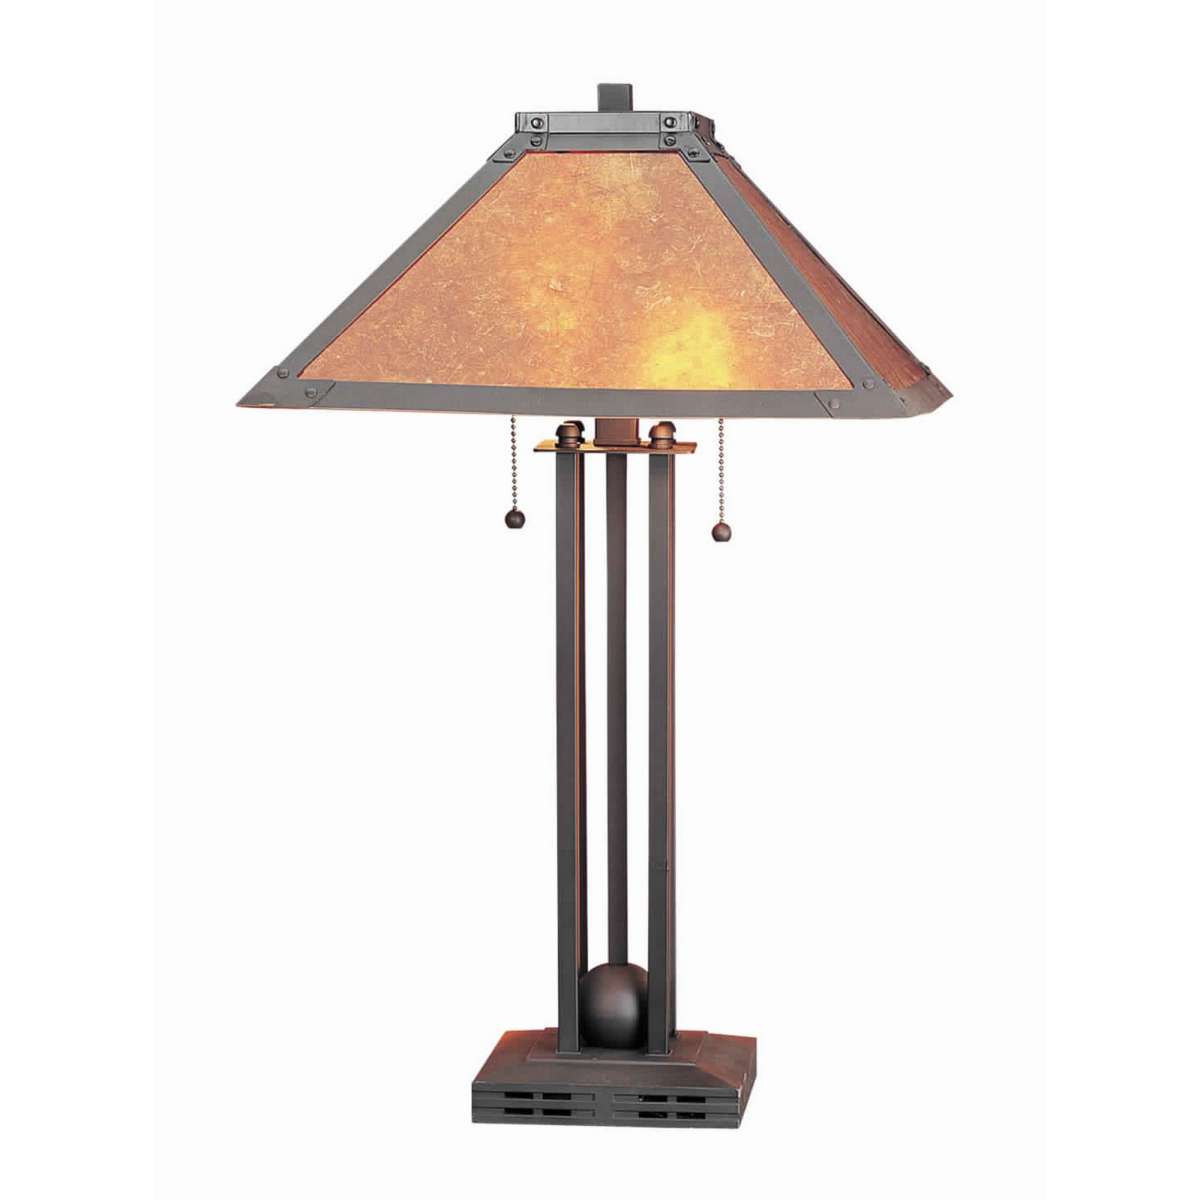 Ball Inlay Metal Body Table Lamp With Square Mica Shade, Bronze By Benzara